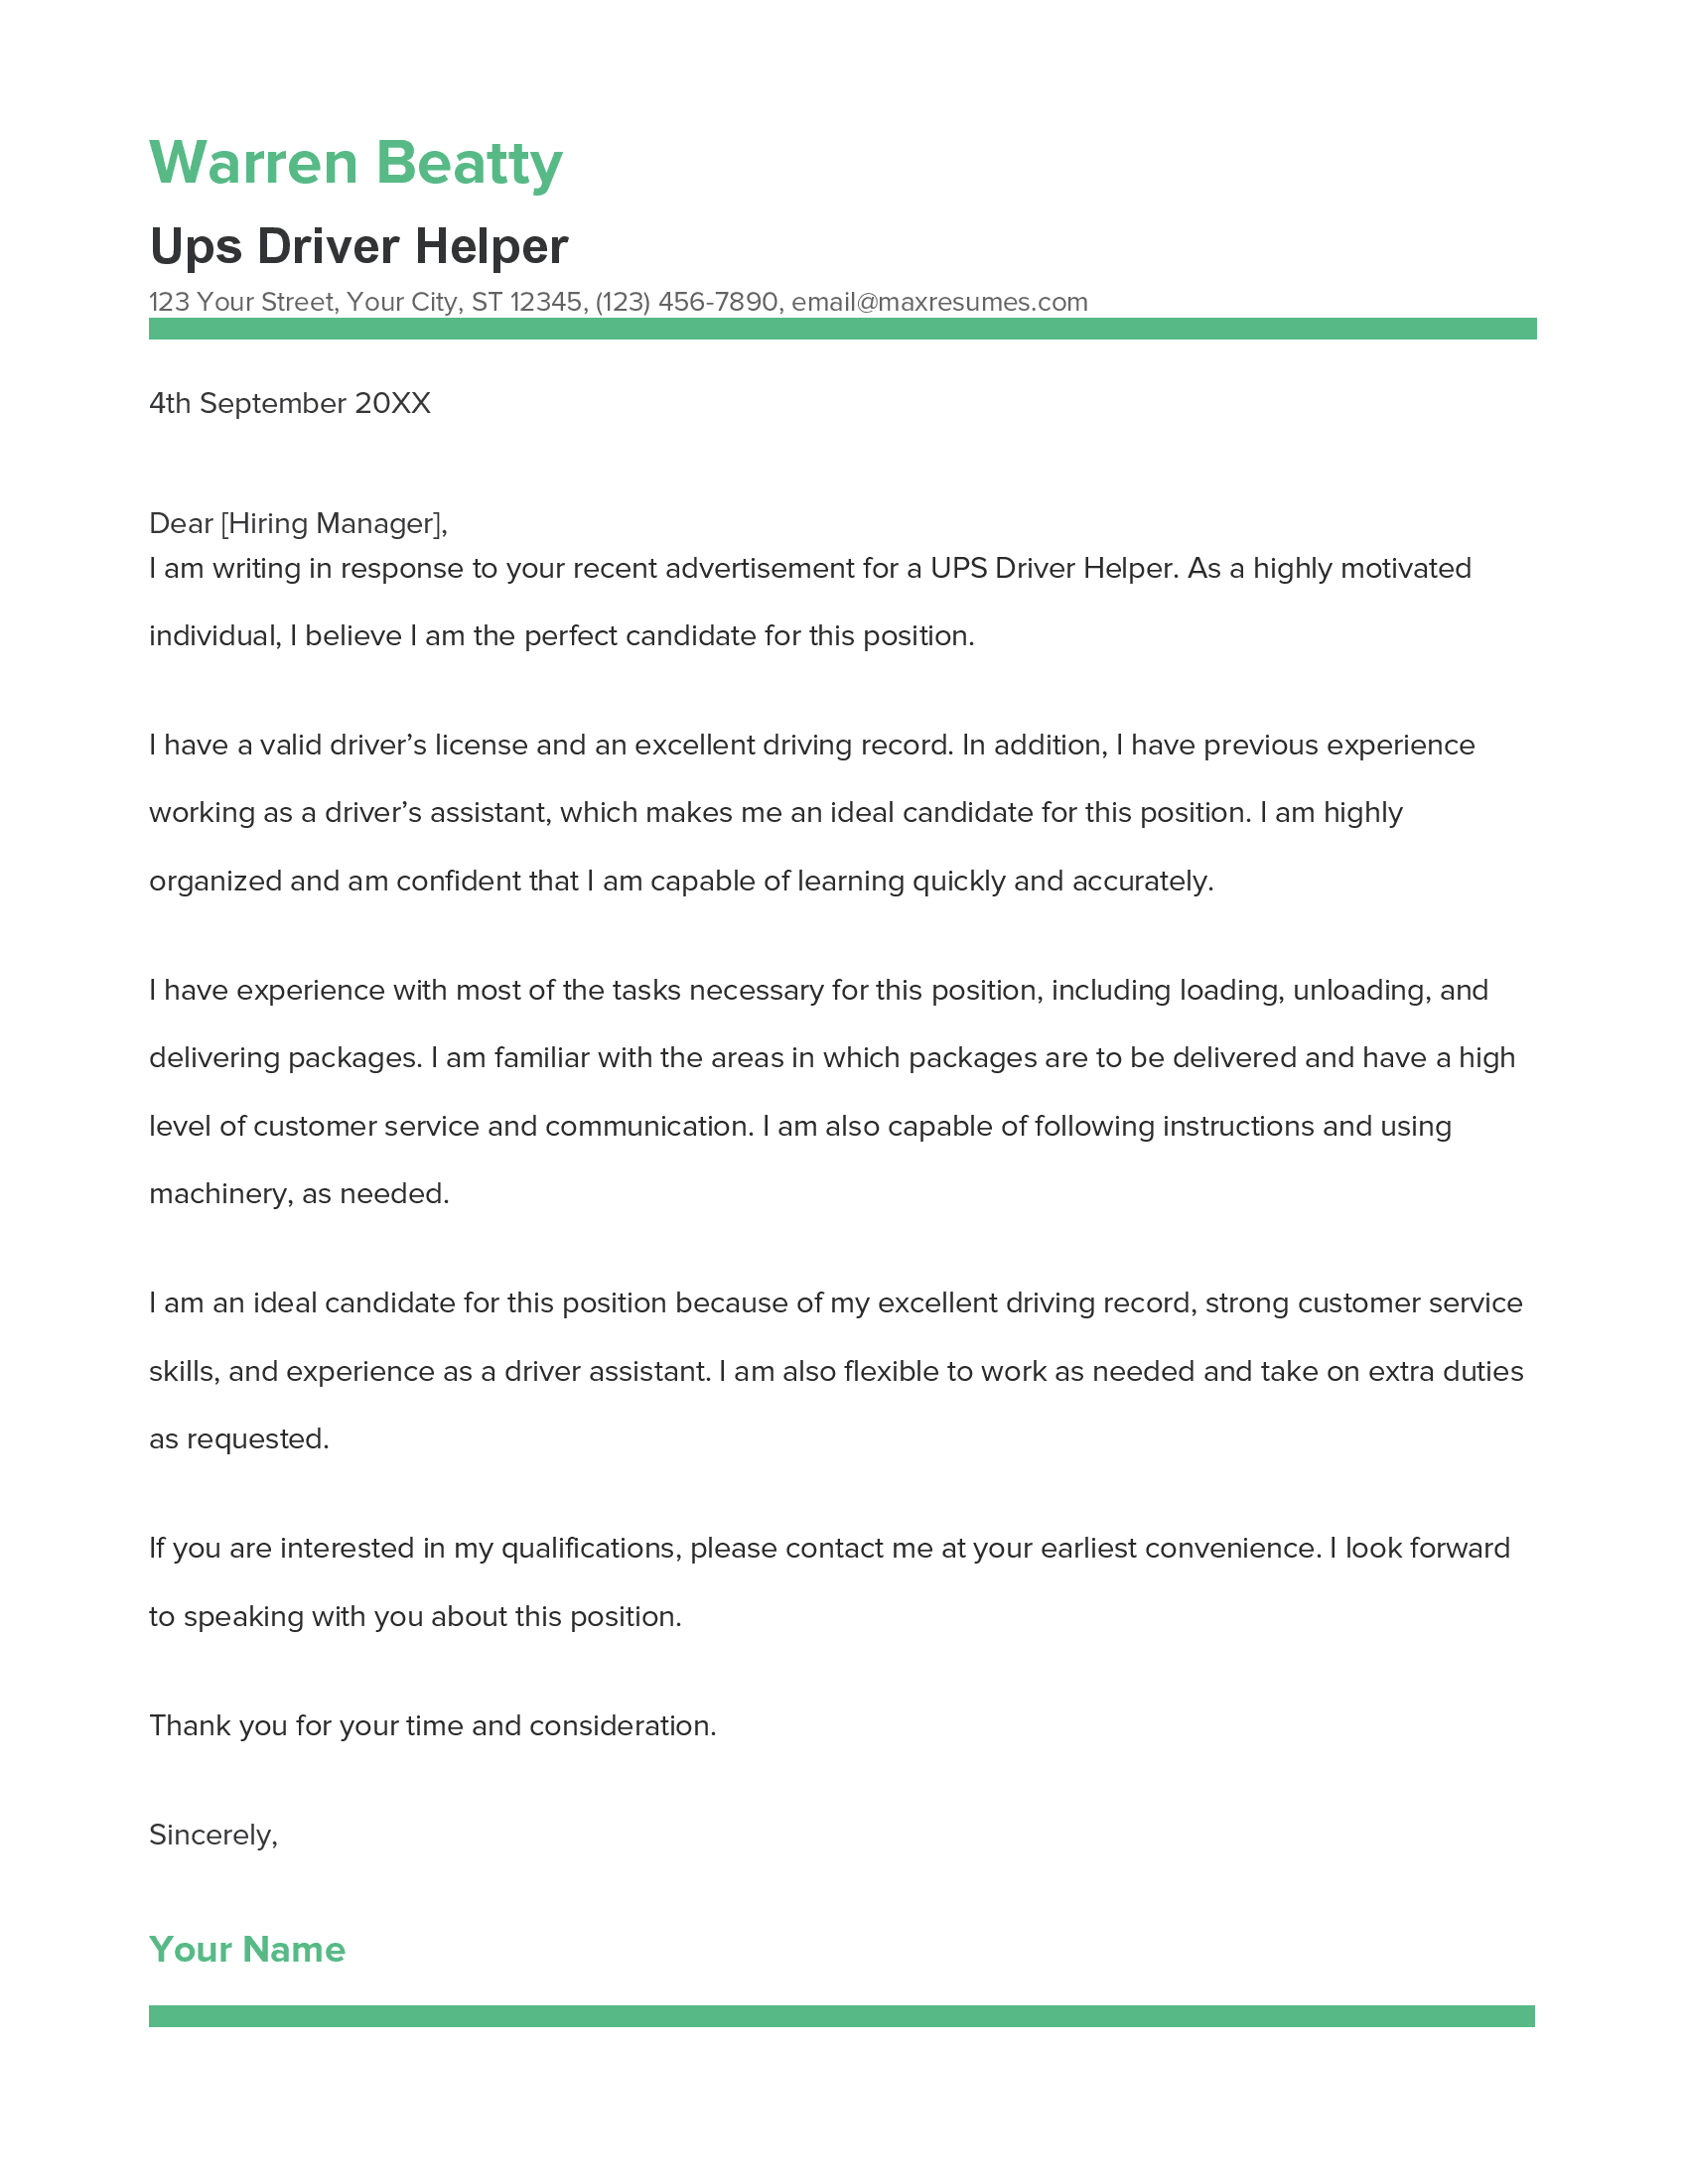 Ups Driver Helper Cover Letter Example